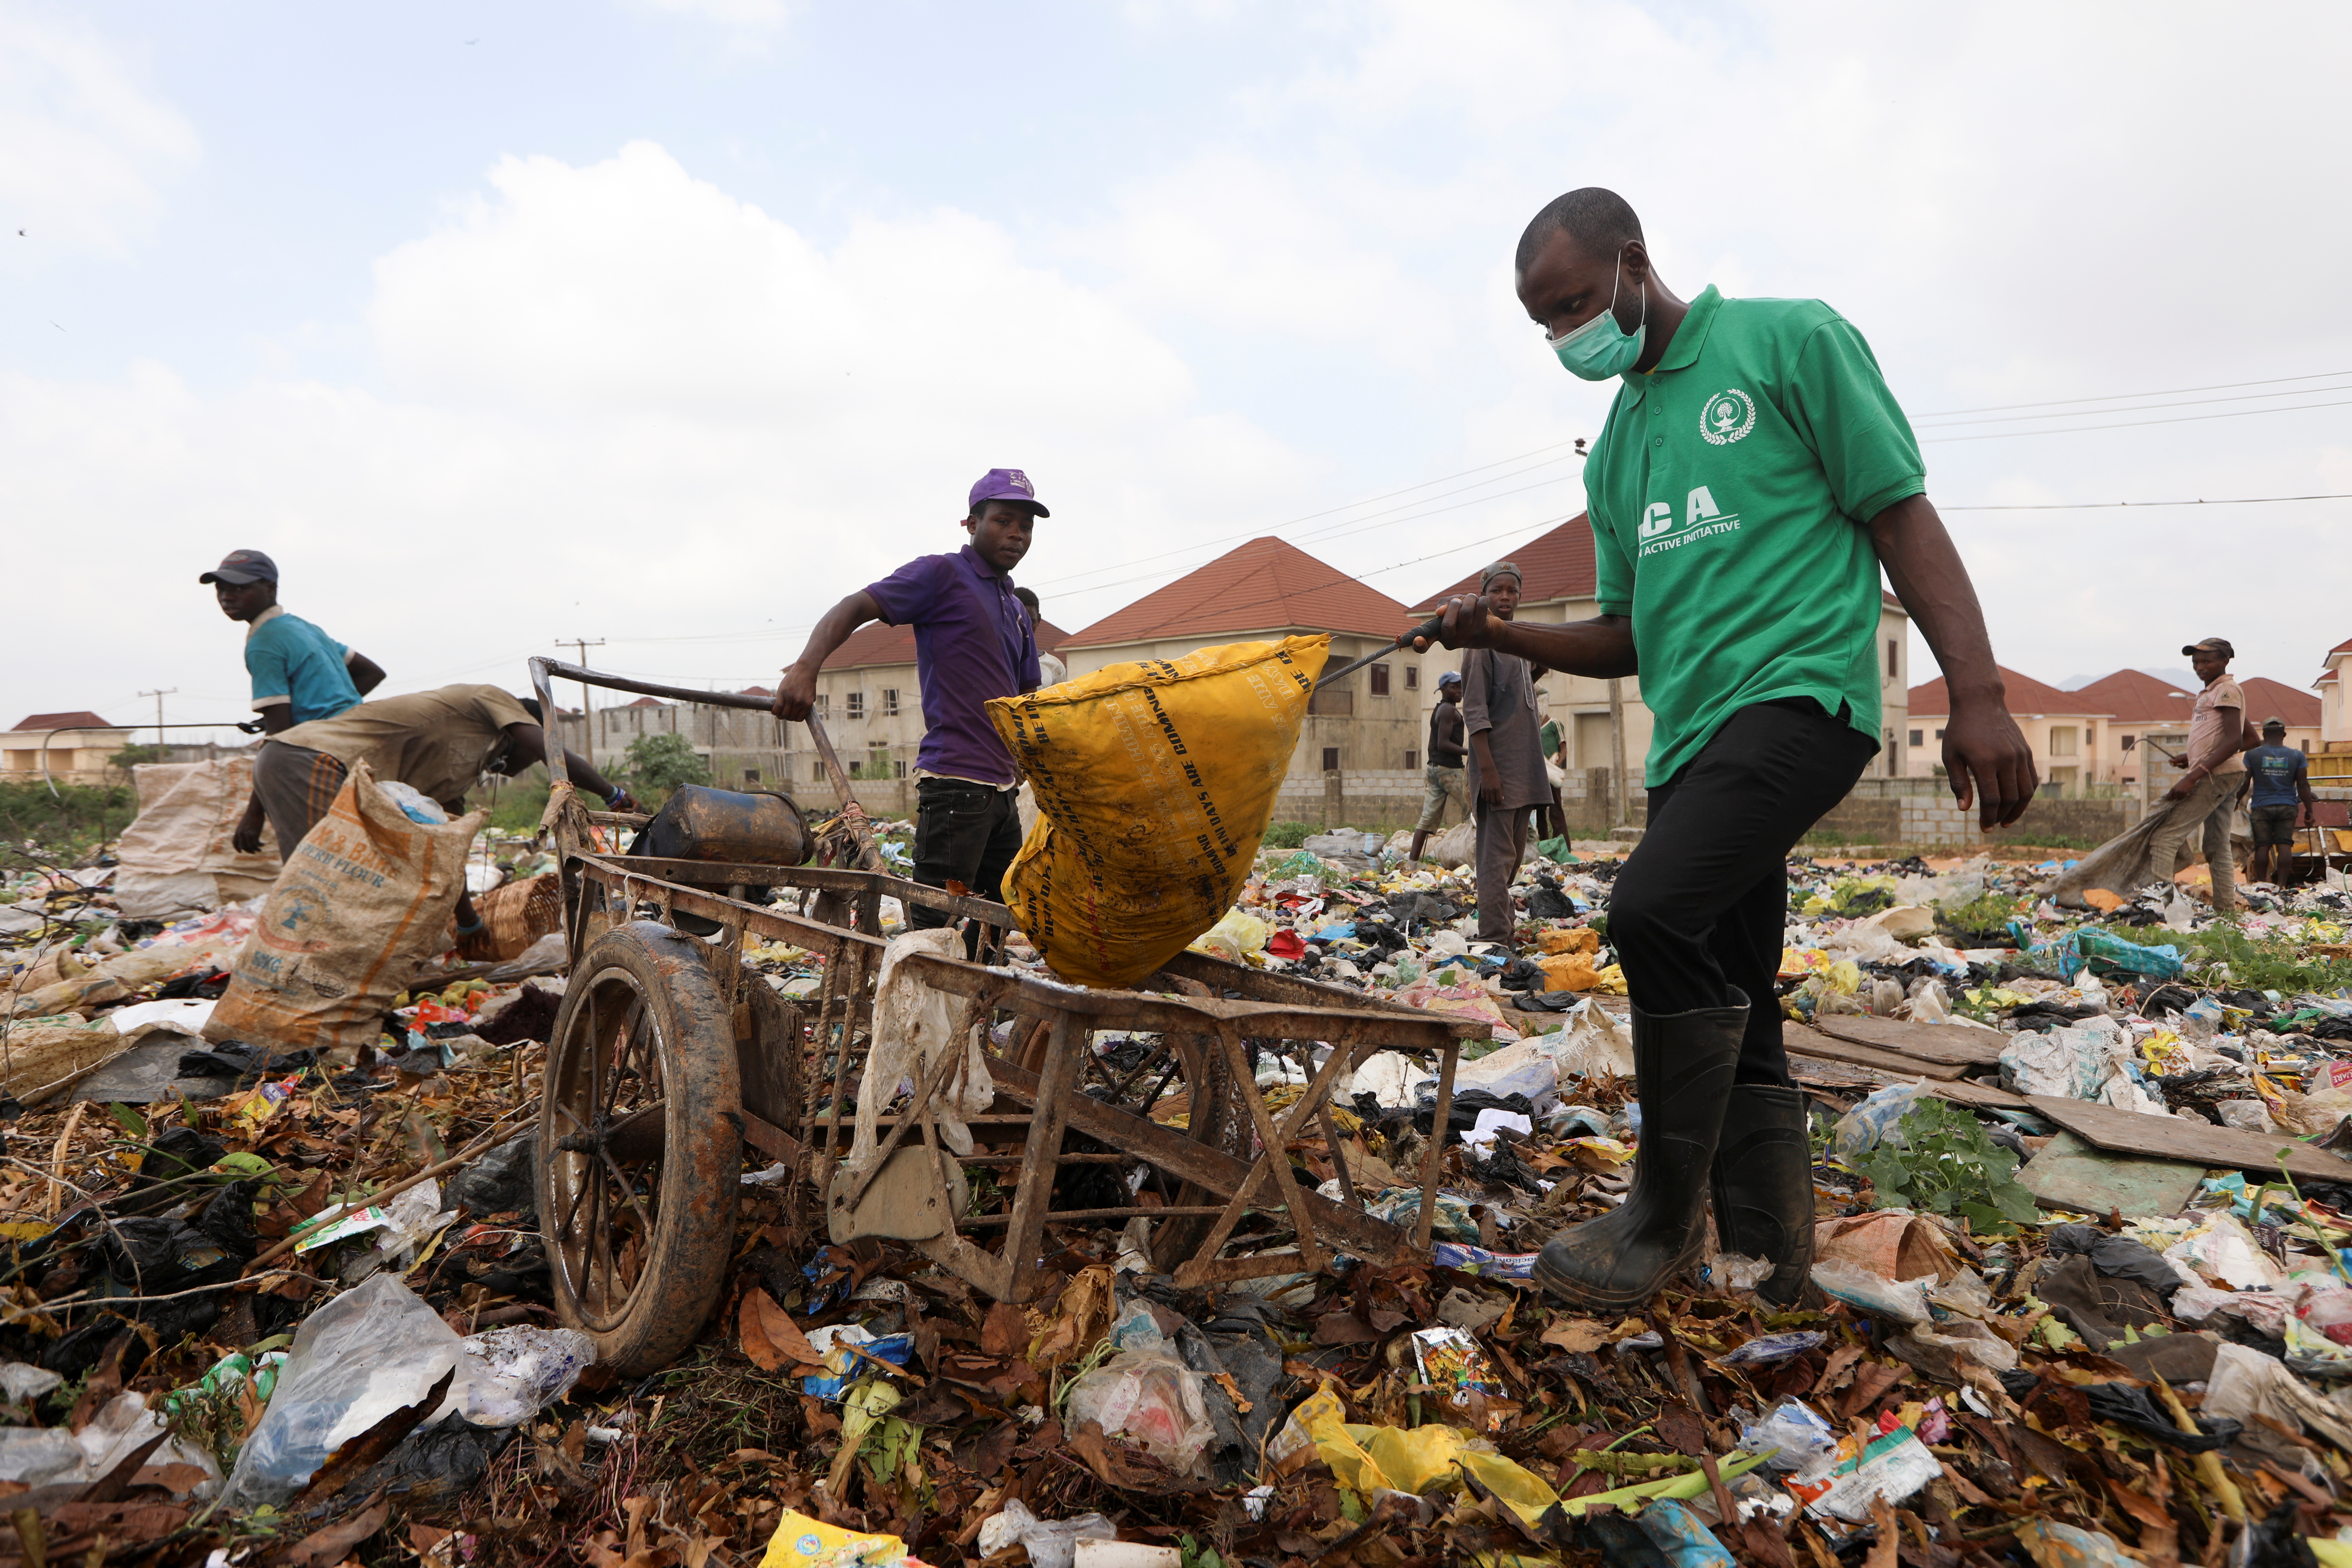 Environmental activist Goodness Dickson, of Eco Clean Active Initiative, picks up a waste item at a dumpsite in Abuja, Nigeria October 16, 2021. Picture taken October 16, 2021. REUTERS/Afolabi Sotunde